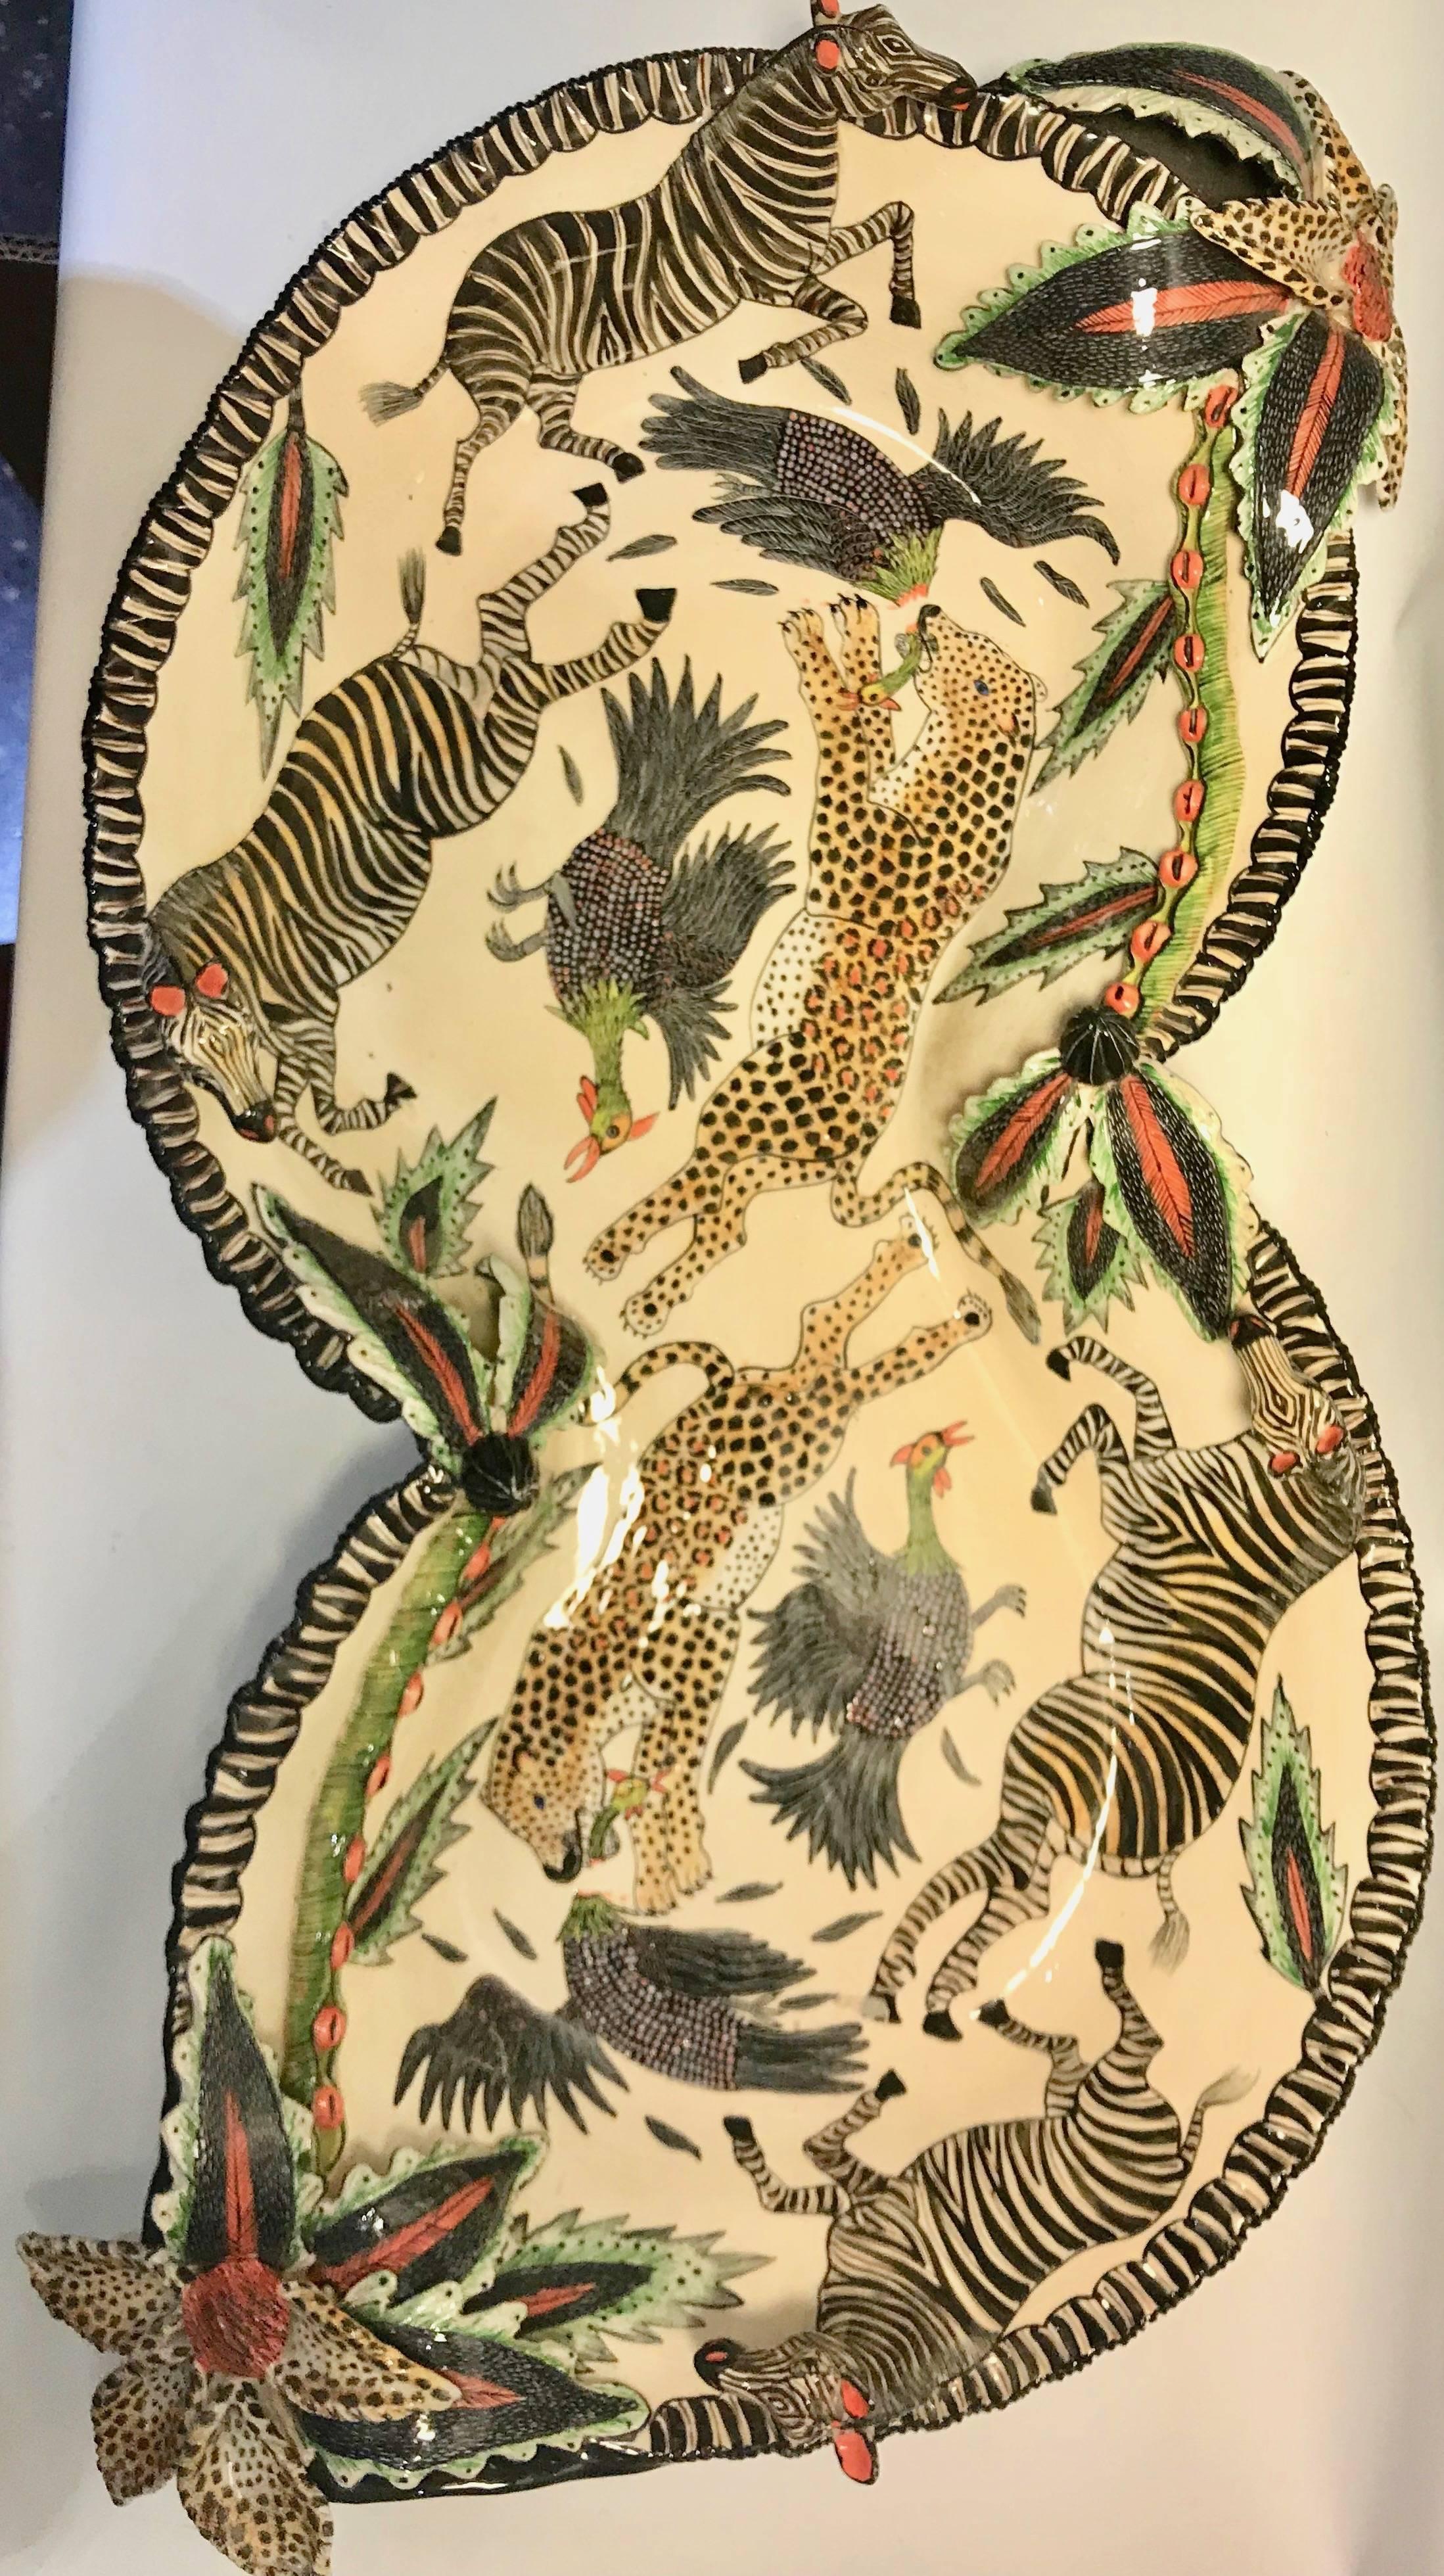 One of a kind zebra and leopard decorative dish/bowl/centrepiece by Ardmore Ceramics, South Africa. 

Ardmore ceramic art was established by Fée Halsted and is situated in the foothills of the Drakensberg Mountains of KwaZulu-Natal where artists